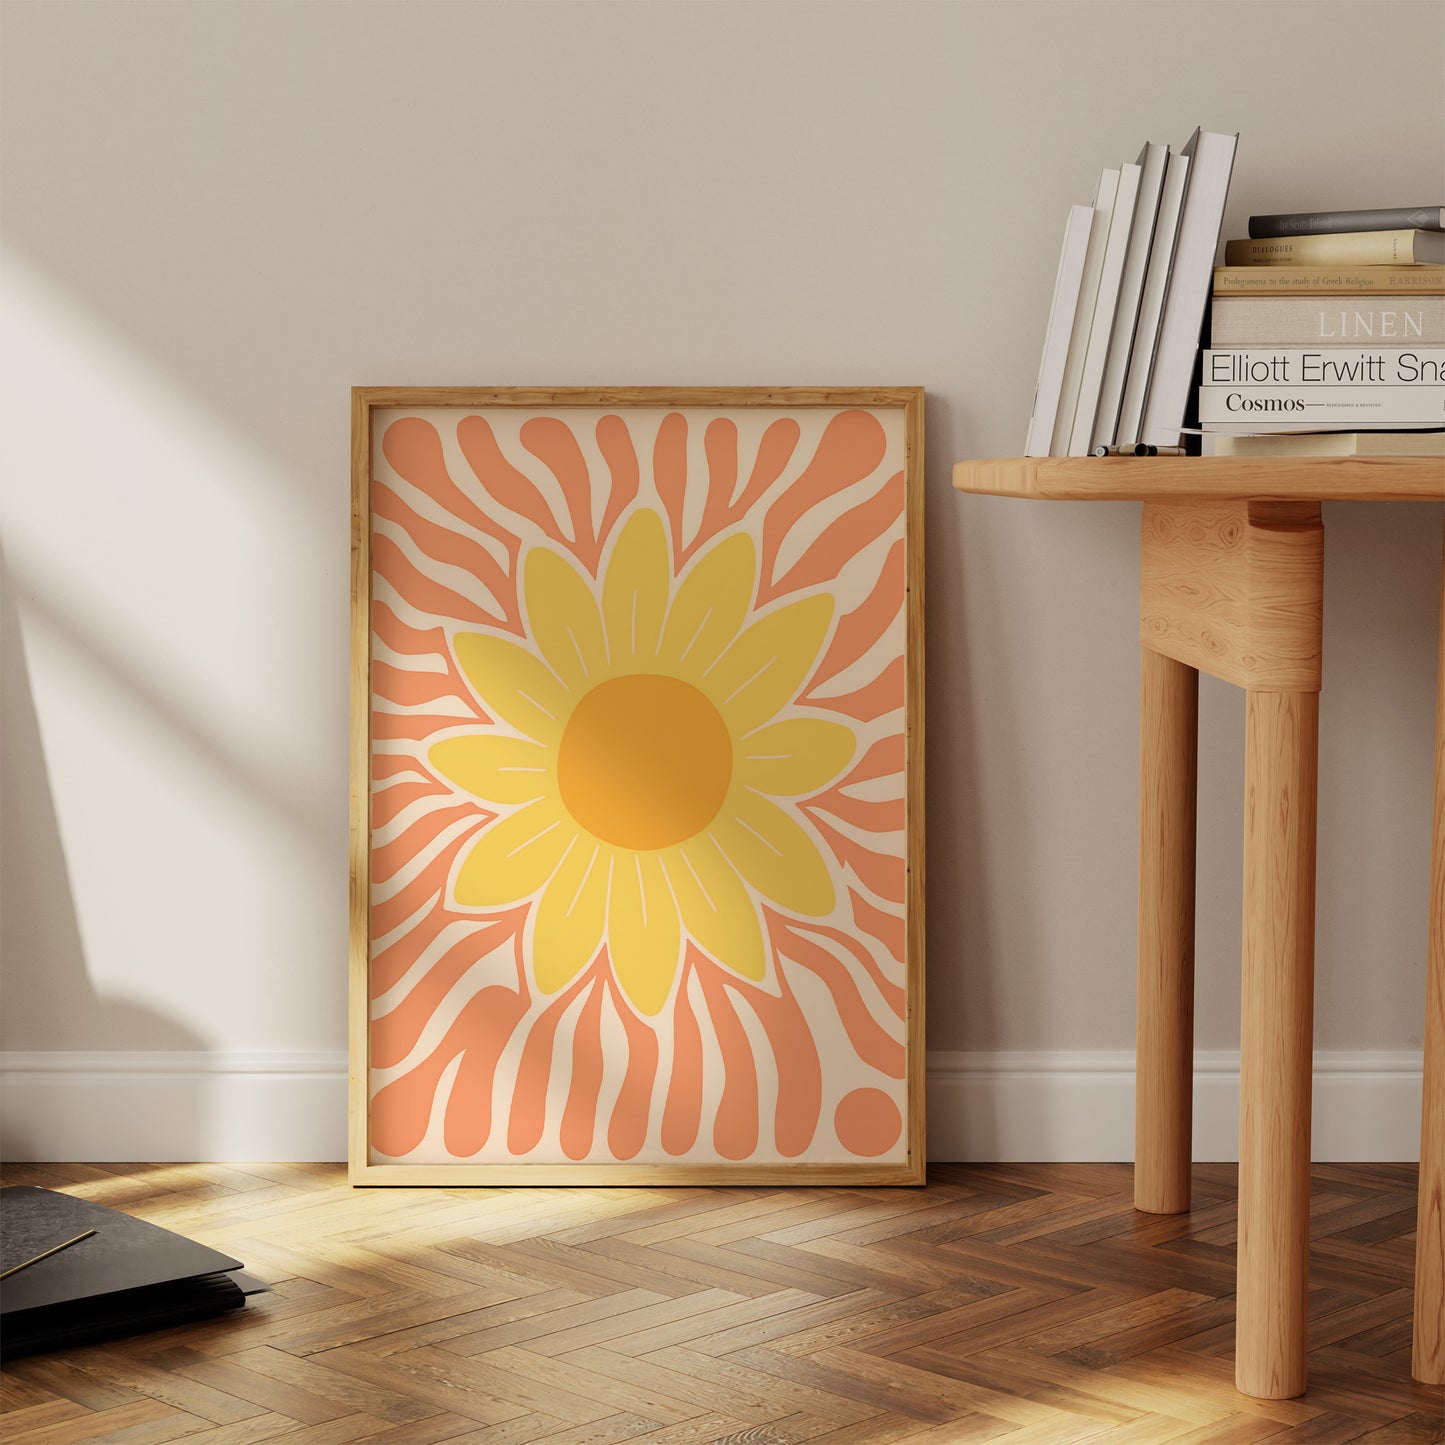 A framed illustration of a stylized sunflower leaning against a wall beside a wooden side table.